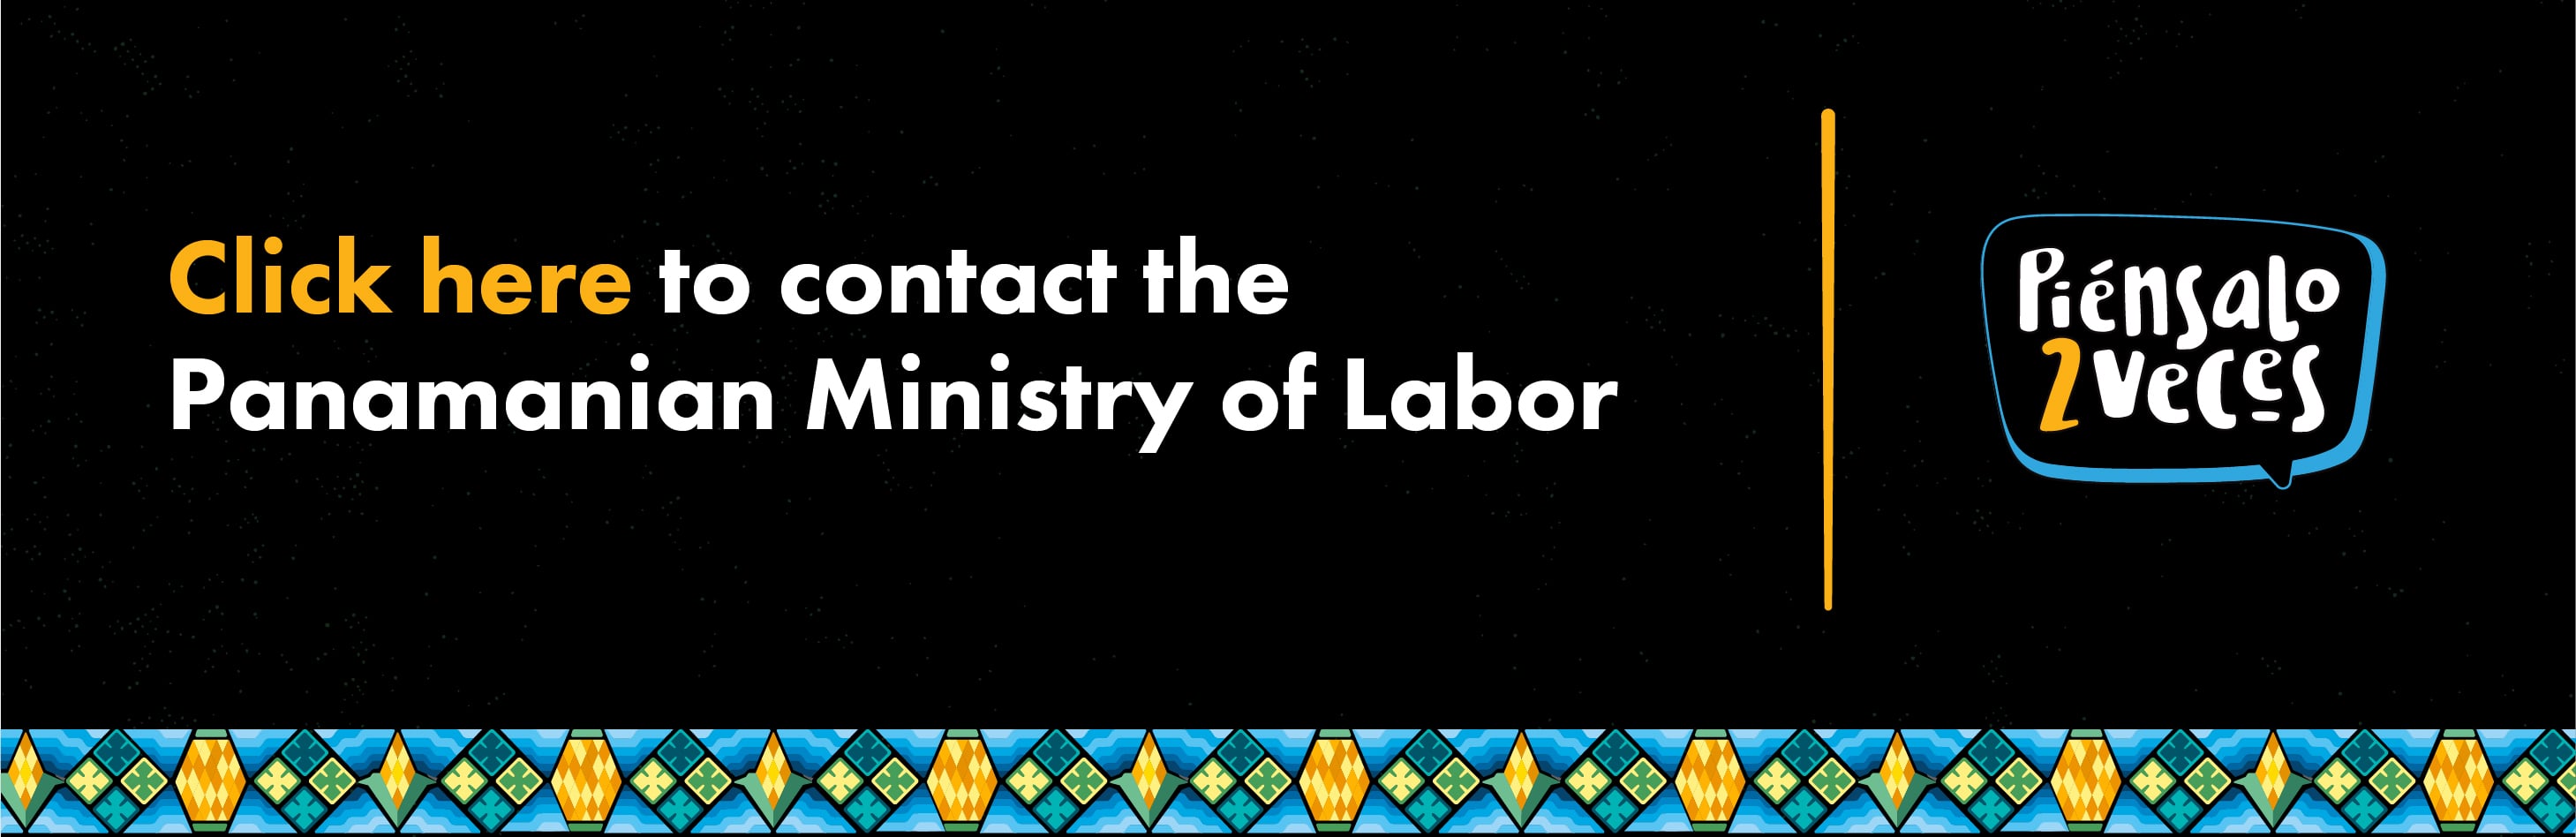 Contact information for the Ministry of Labor of Panama